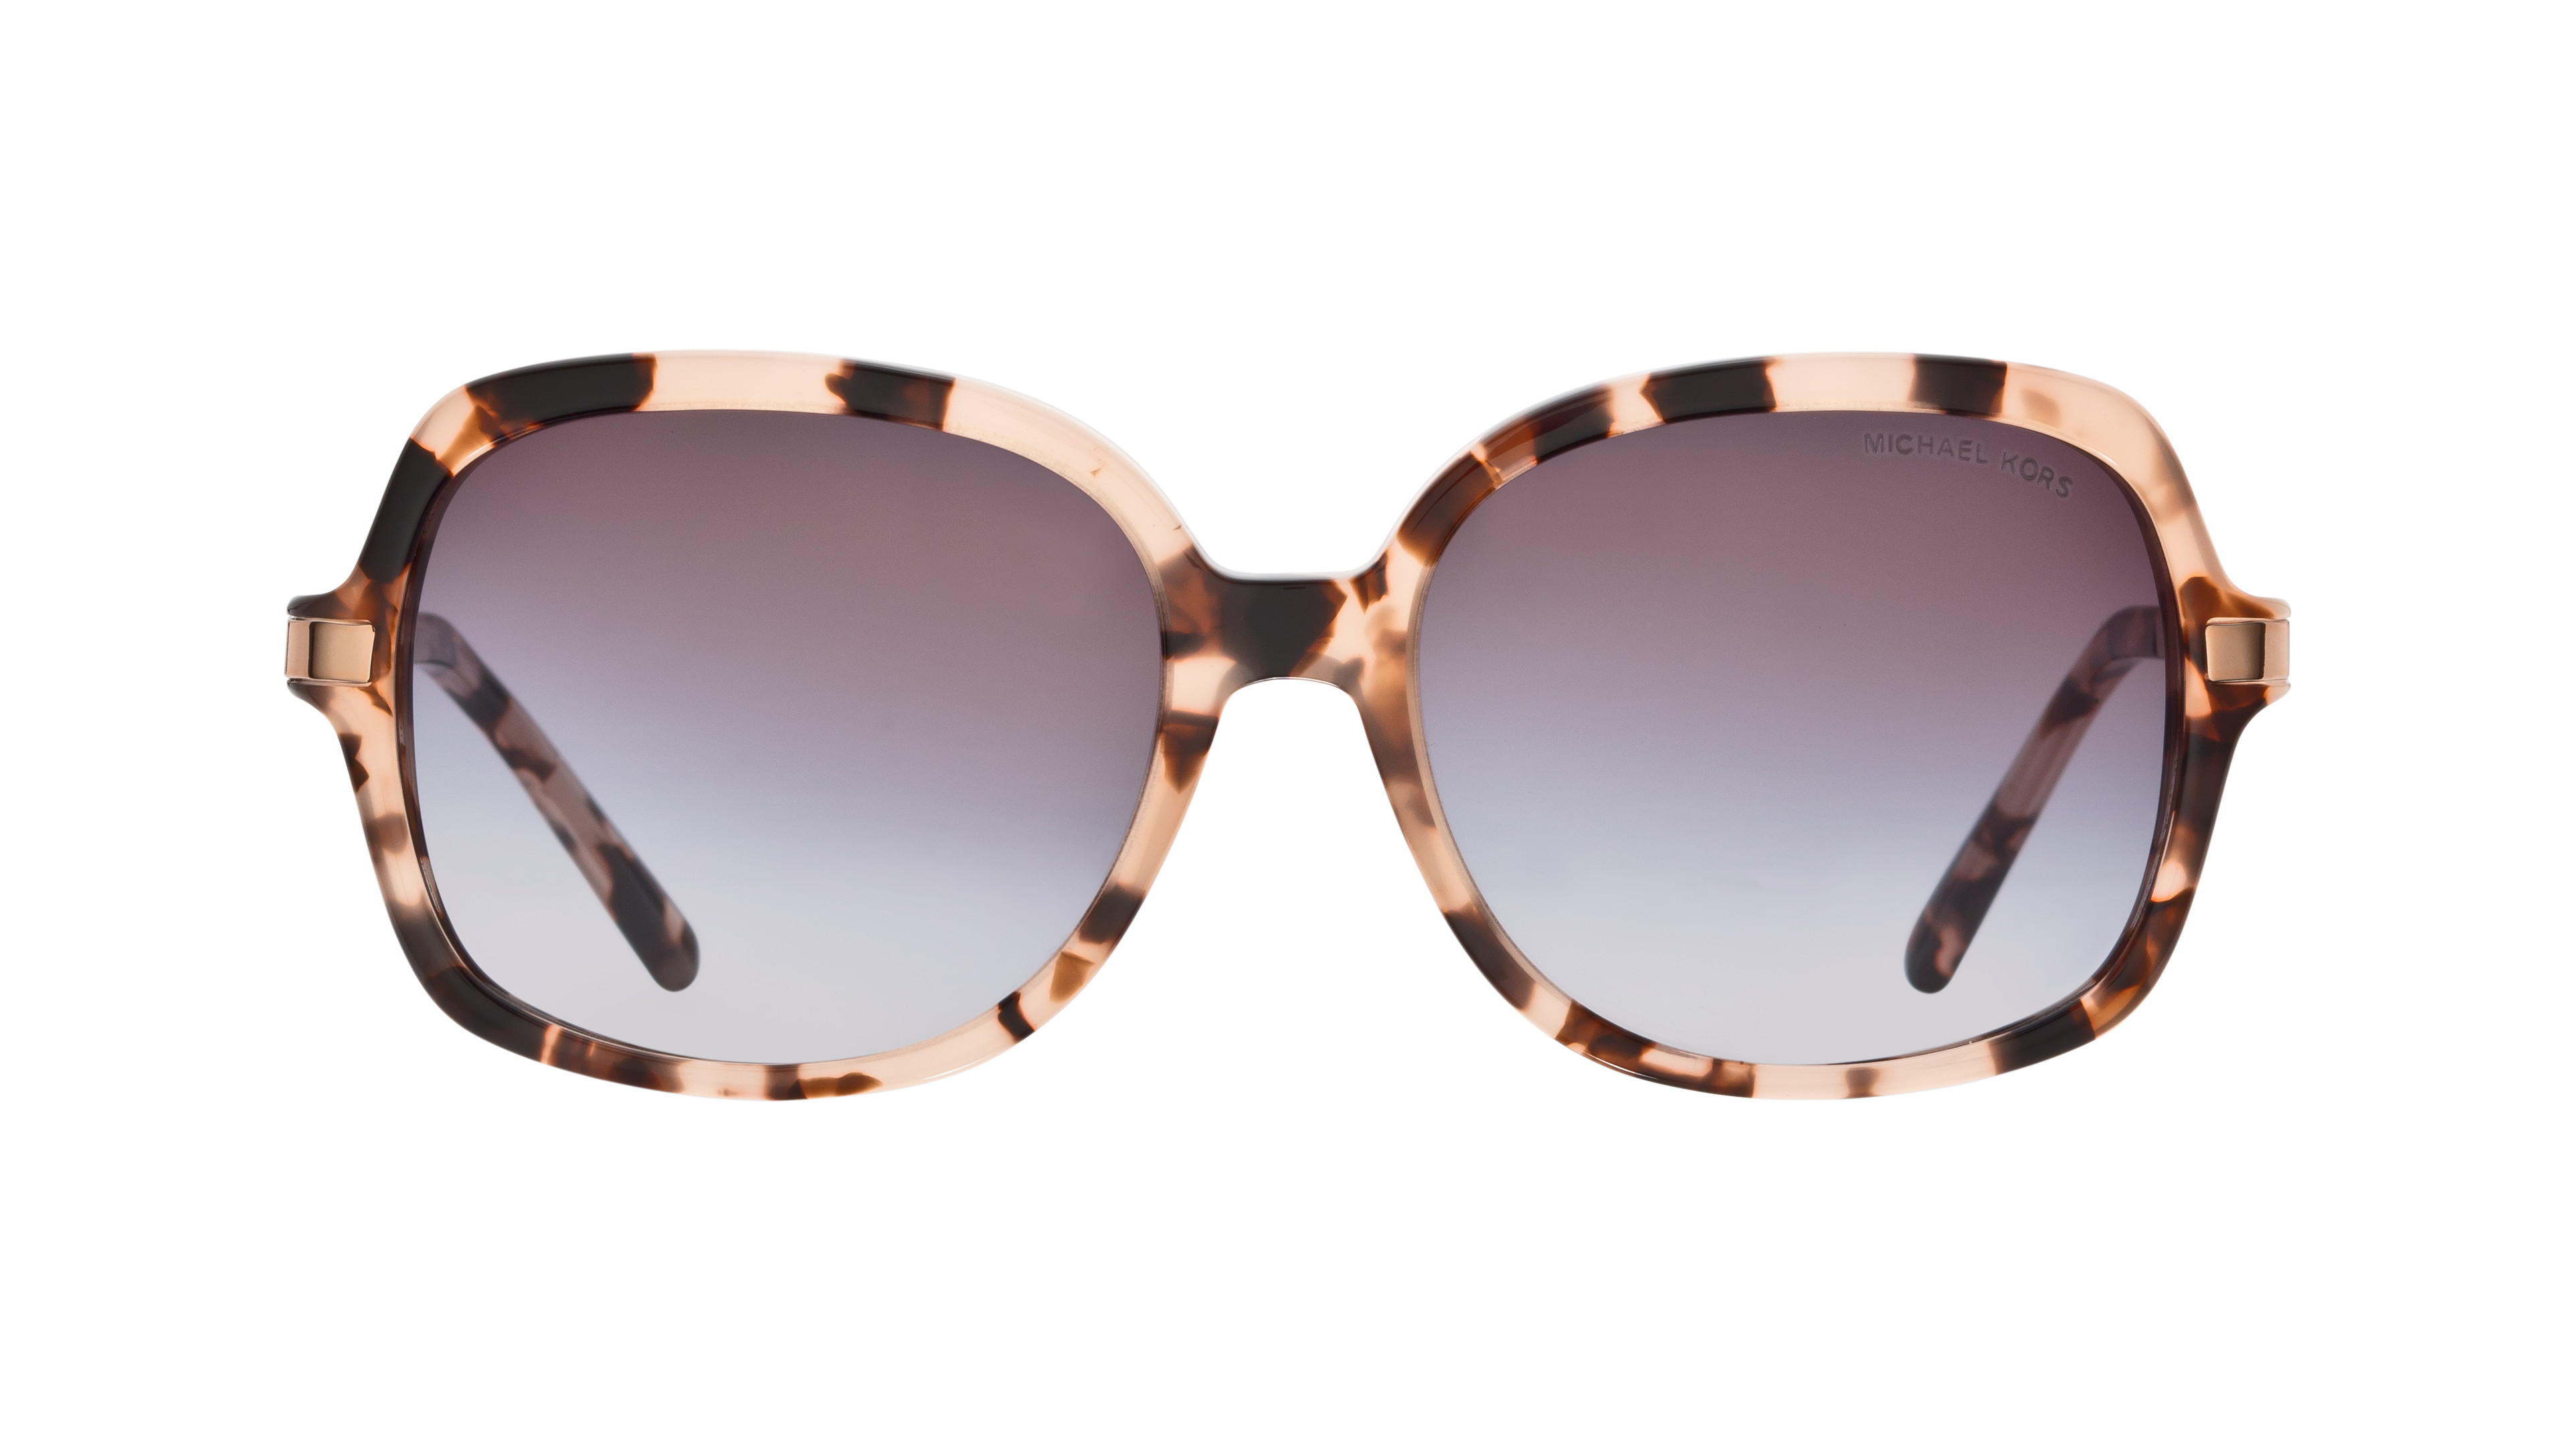 [products.image.front] Michael Kors ADRIANNA II 0MK2024 316213 Sonnenbrille